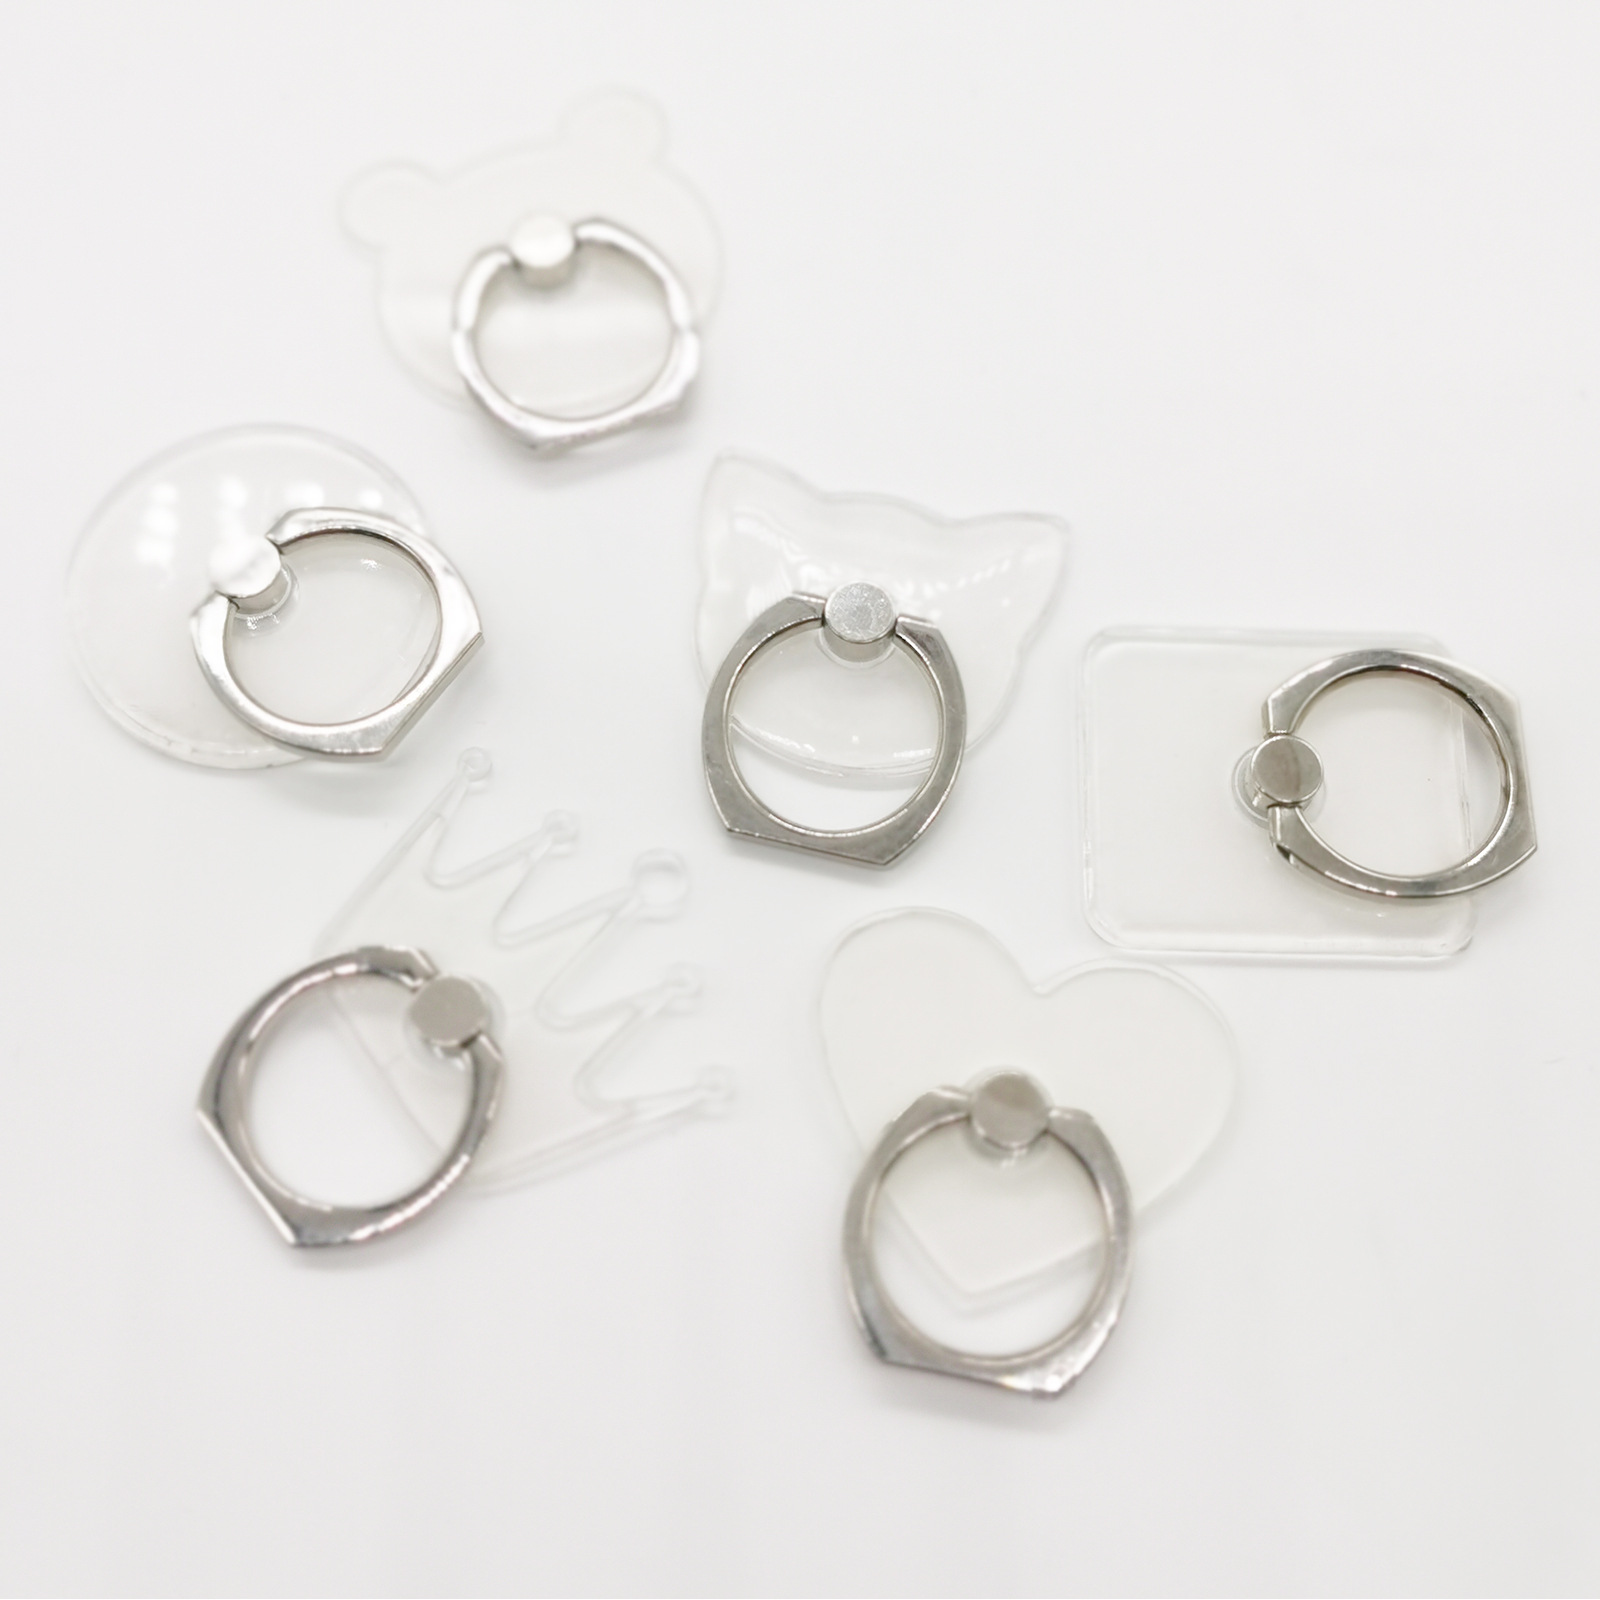 Bakeey-Universal-Transparent-Phone-Ring-Holder-PC-Finger-Ring-Grip-Mobile-Phone-Bracket-Stand-1829269-11